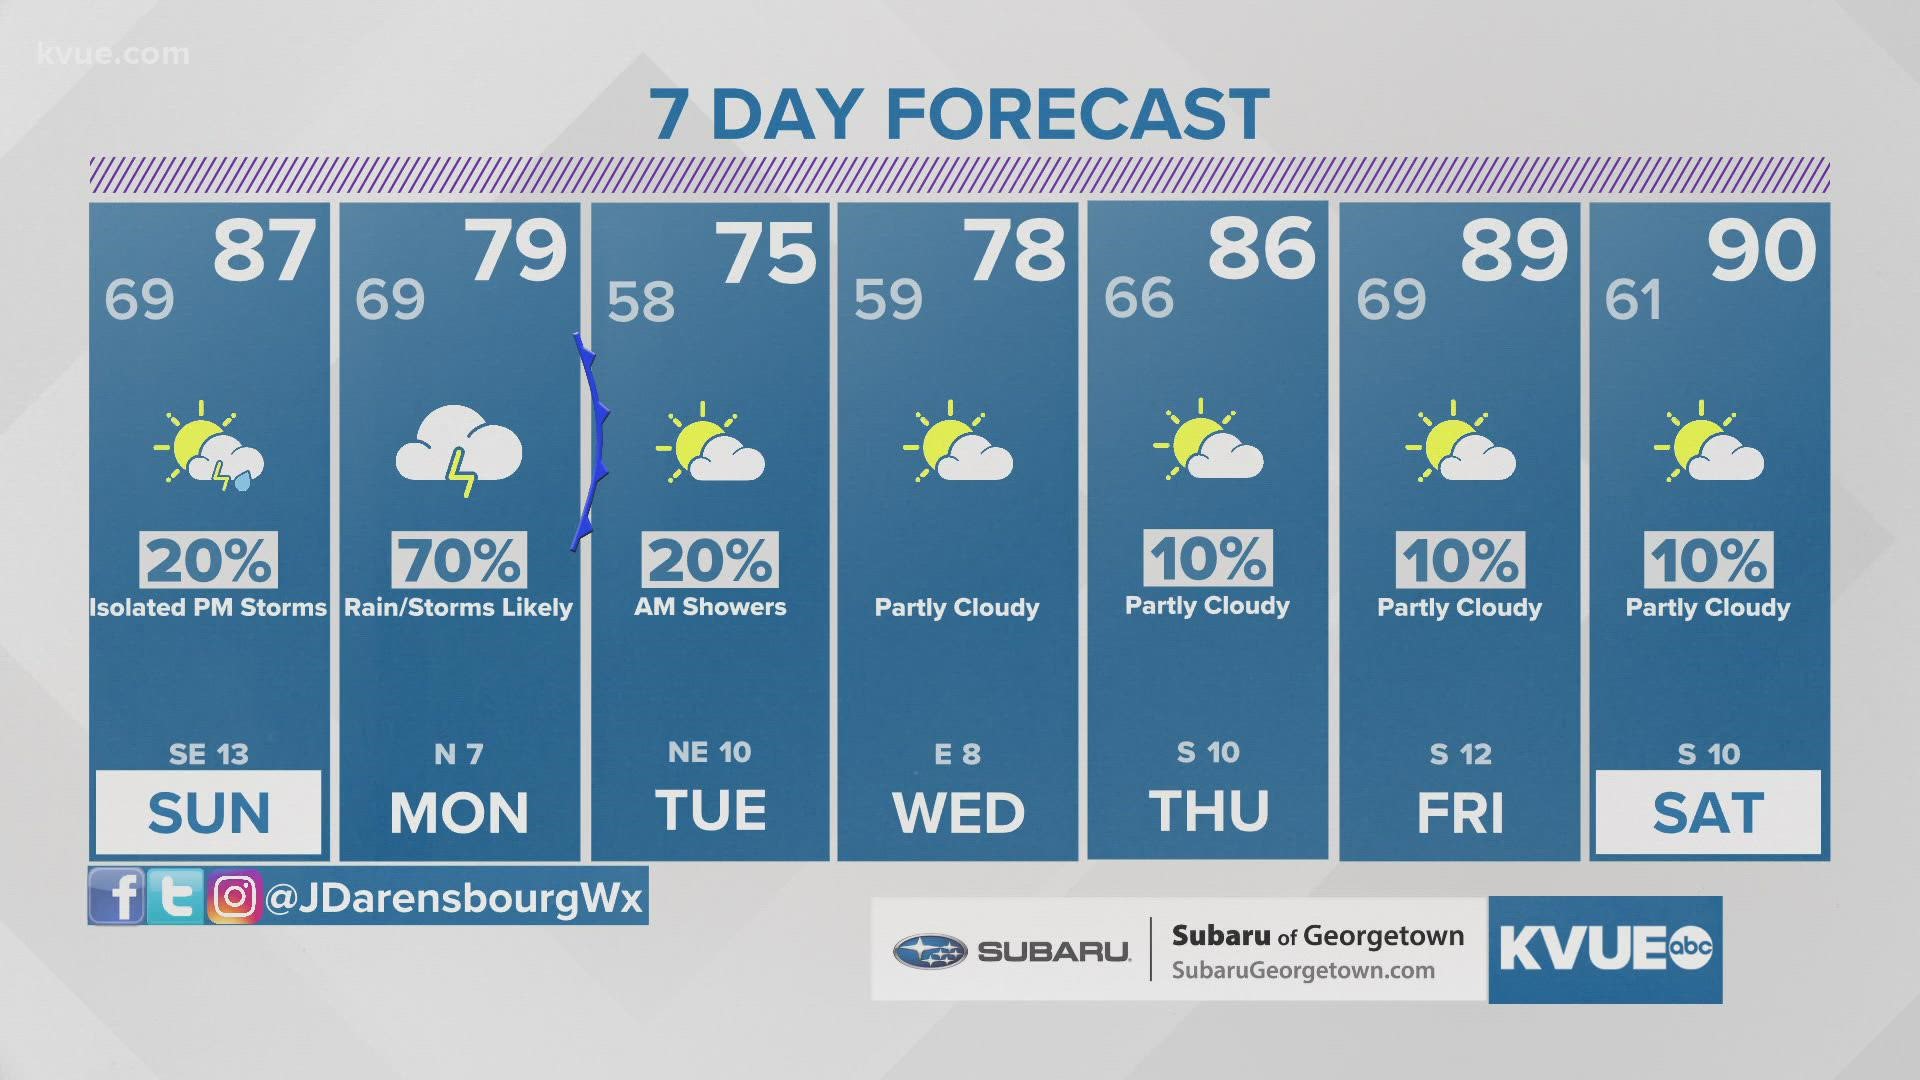 Chance of a few storms Sunday before more widespread rain Monday